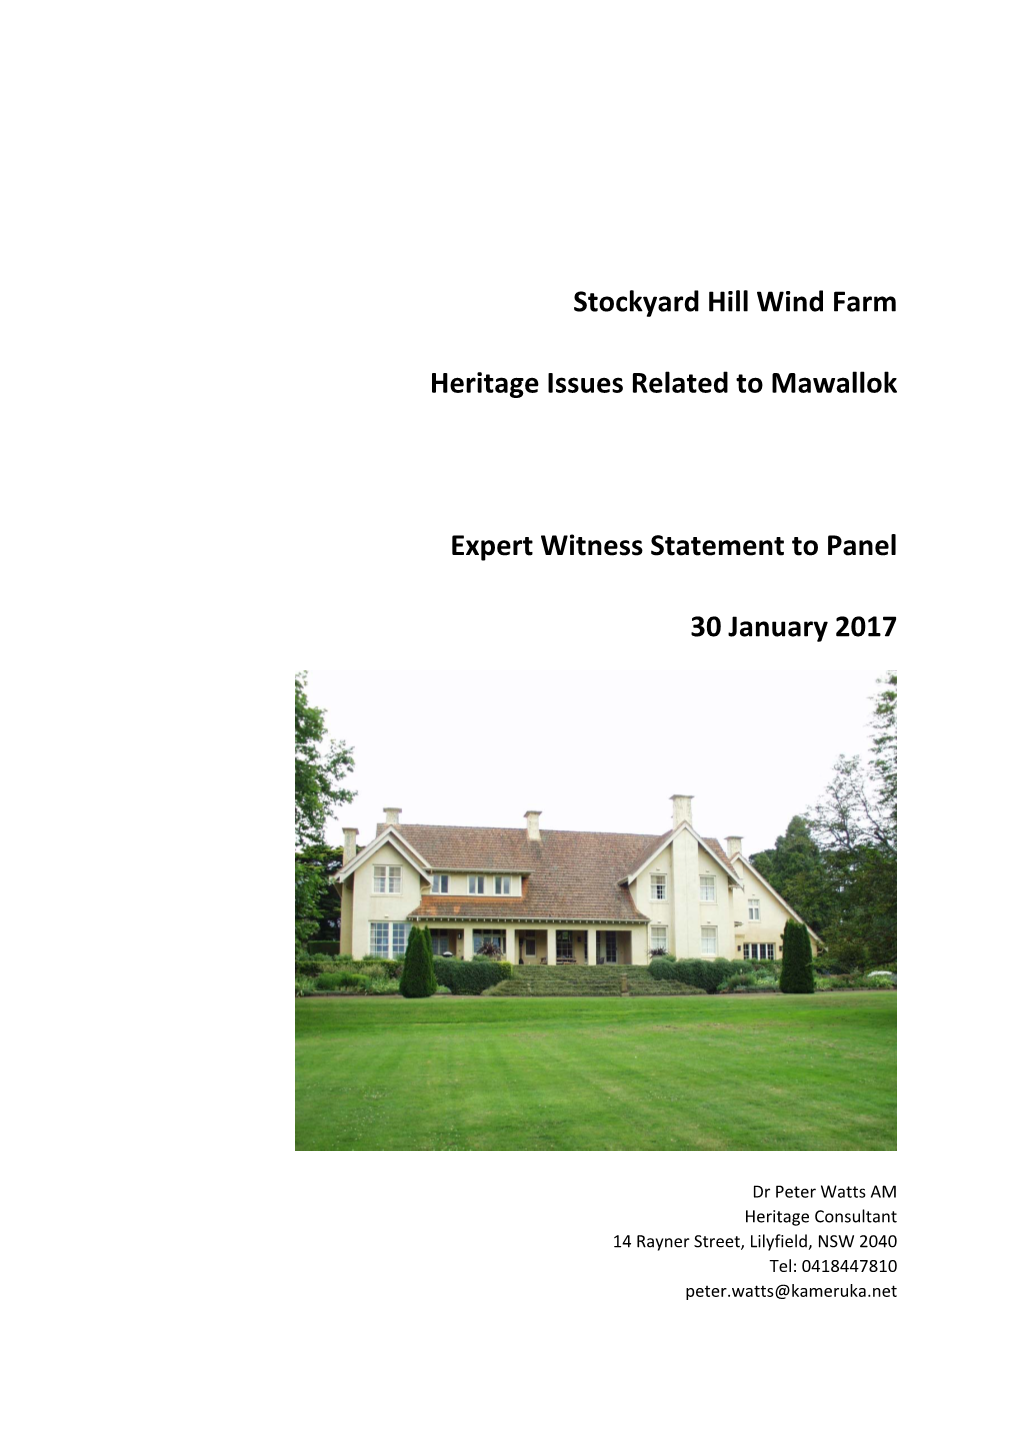 Stockyard Hill Wind Farm Heritage Issues Related to Mawallok Expert